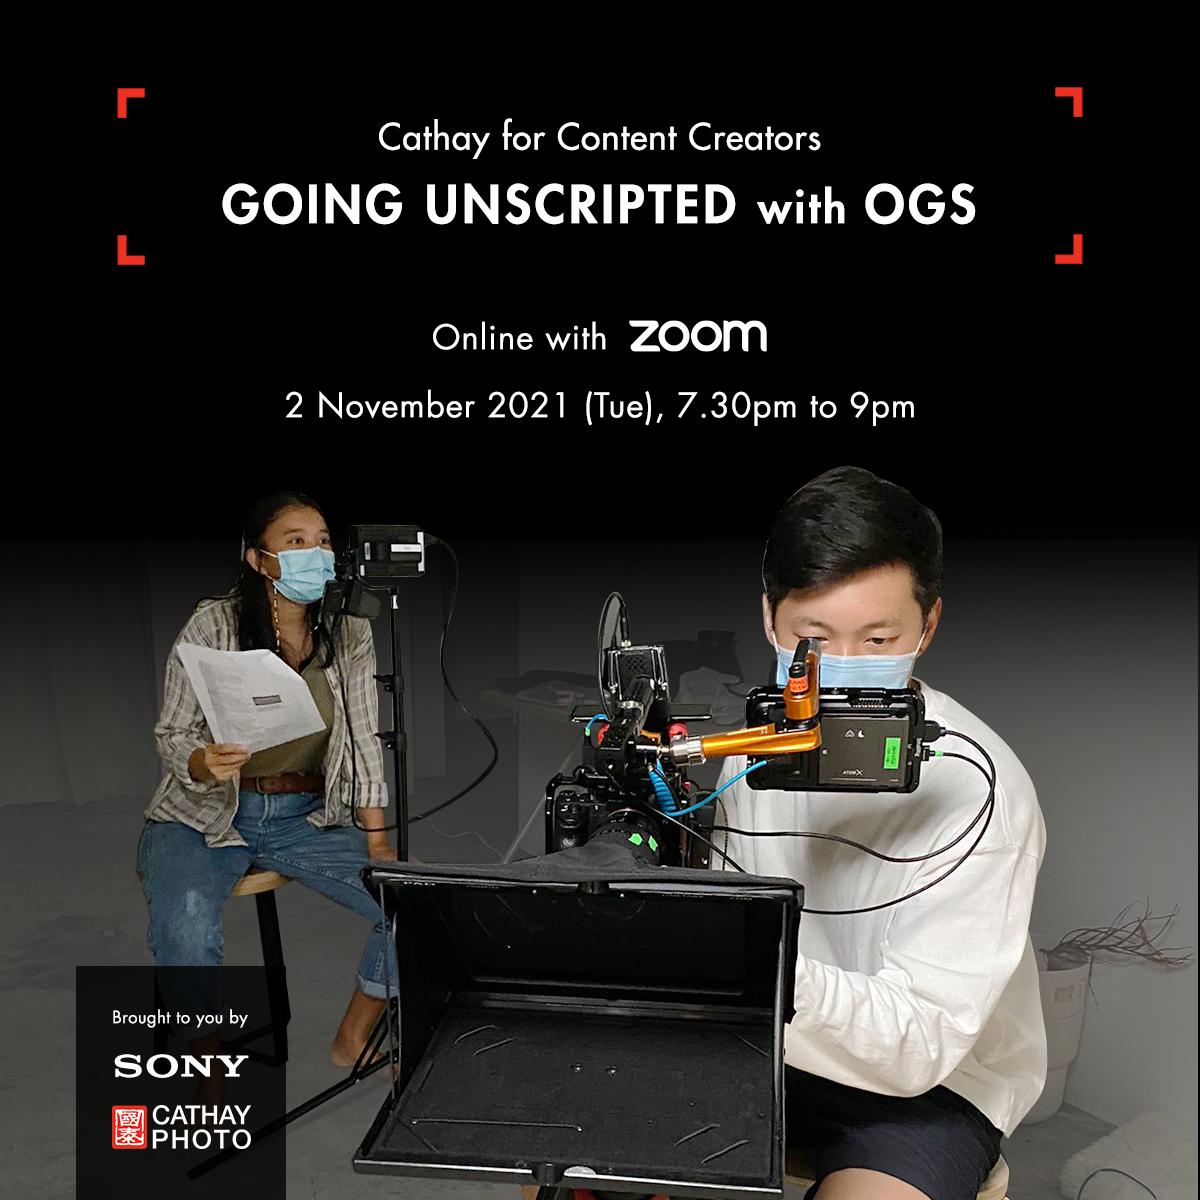 Cathay For Content Creators: Going Unscripted with OGS